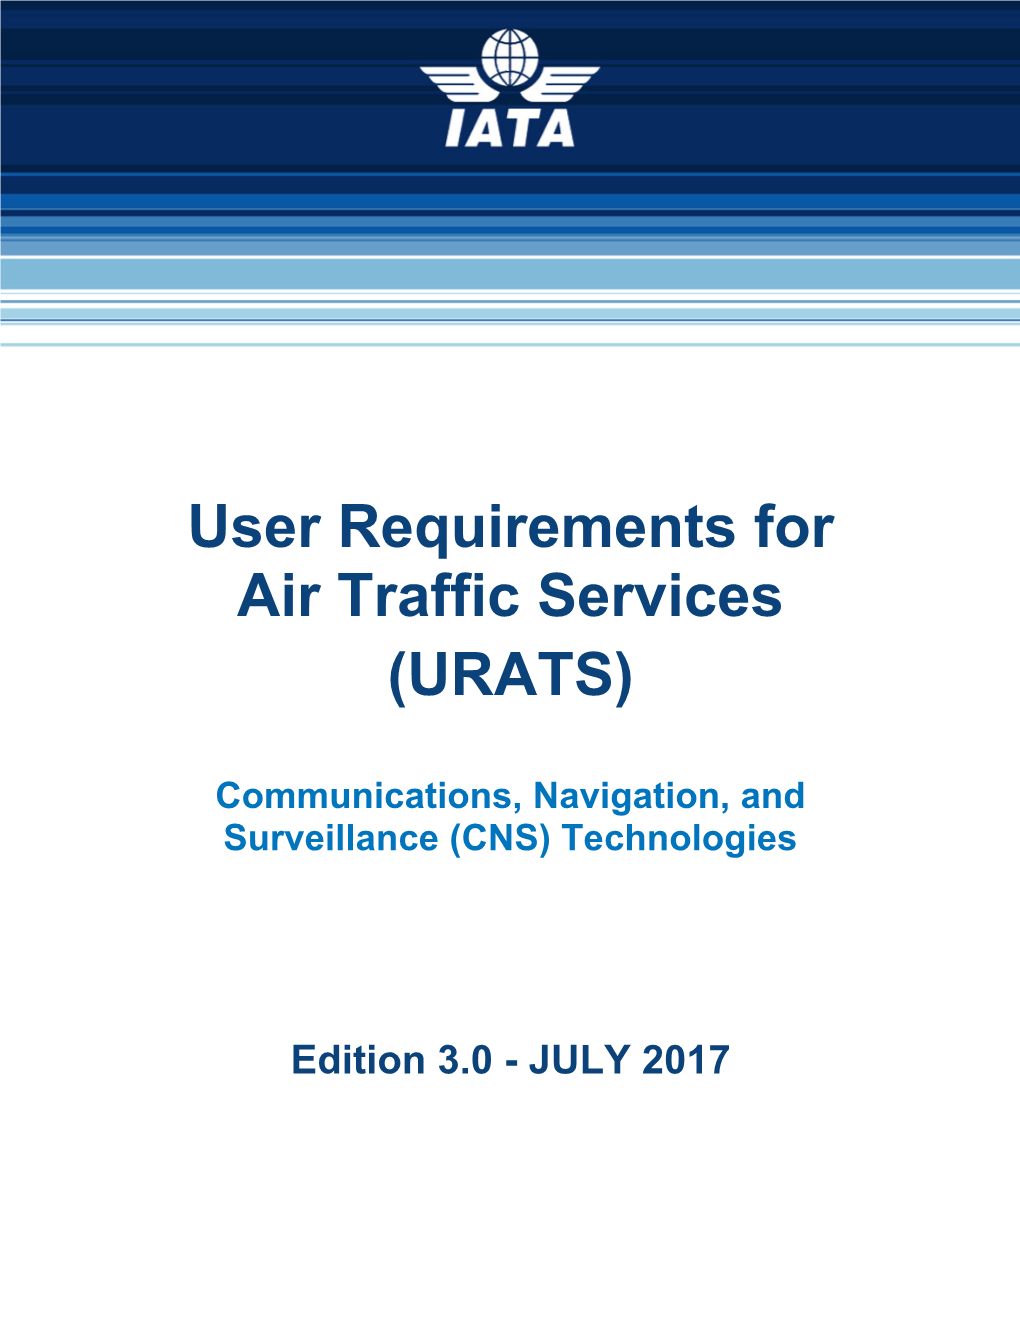 User Requirements for Air Traffic Services (URATS)